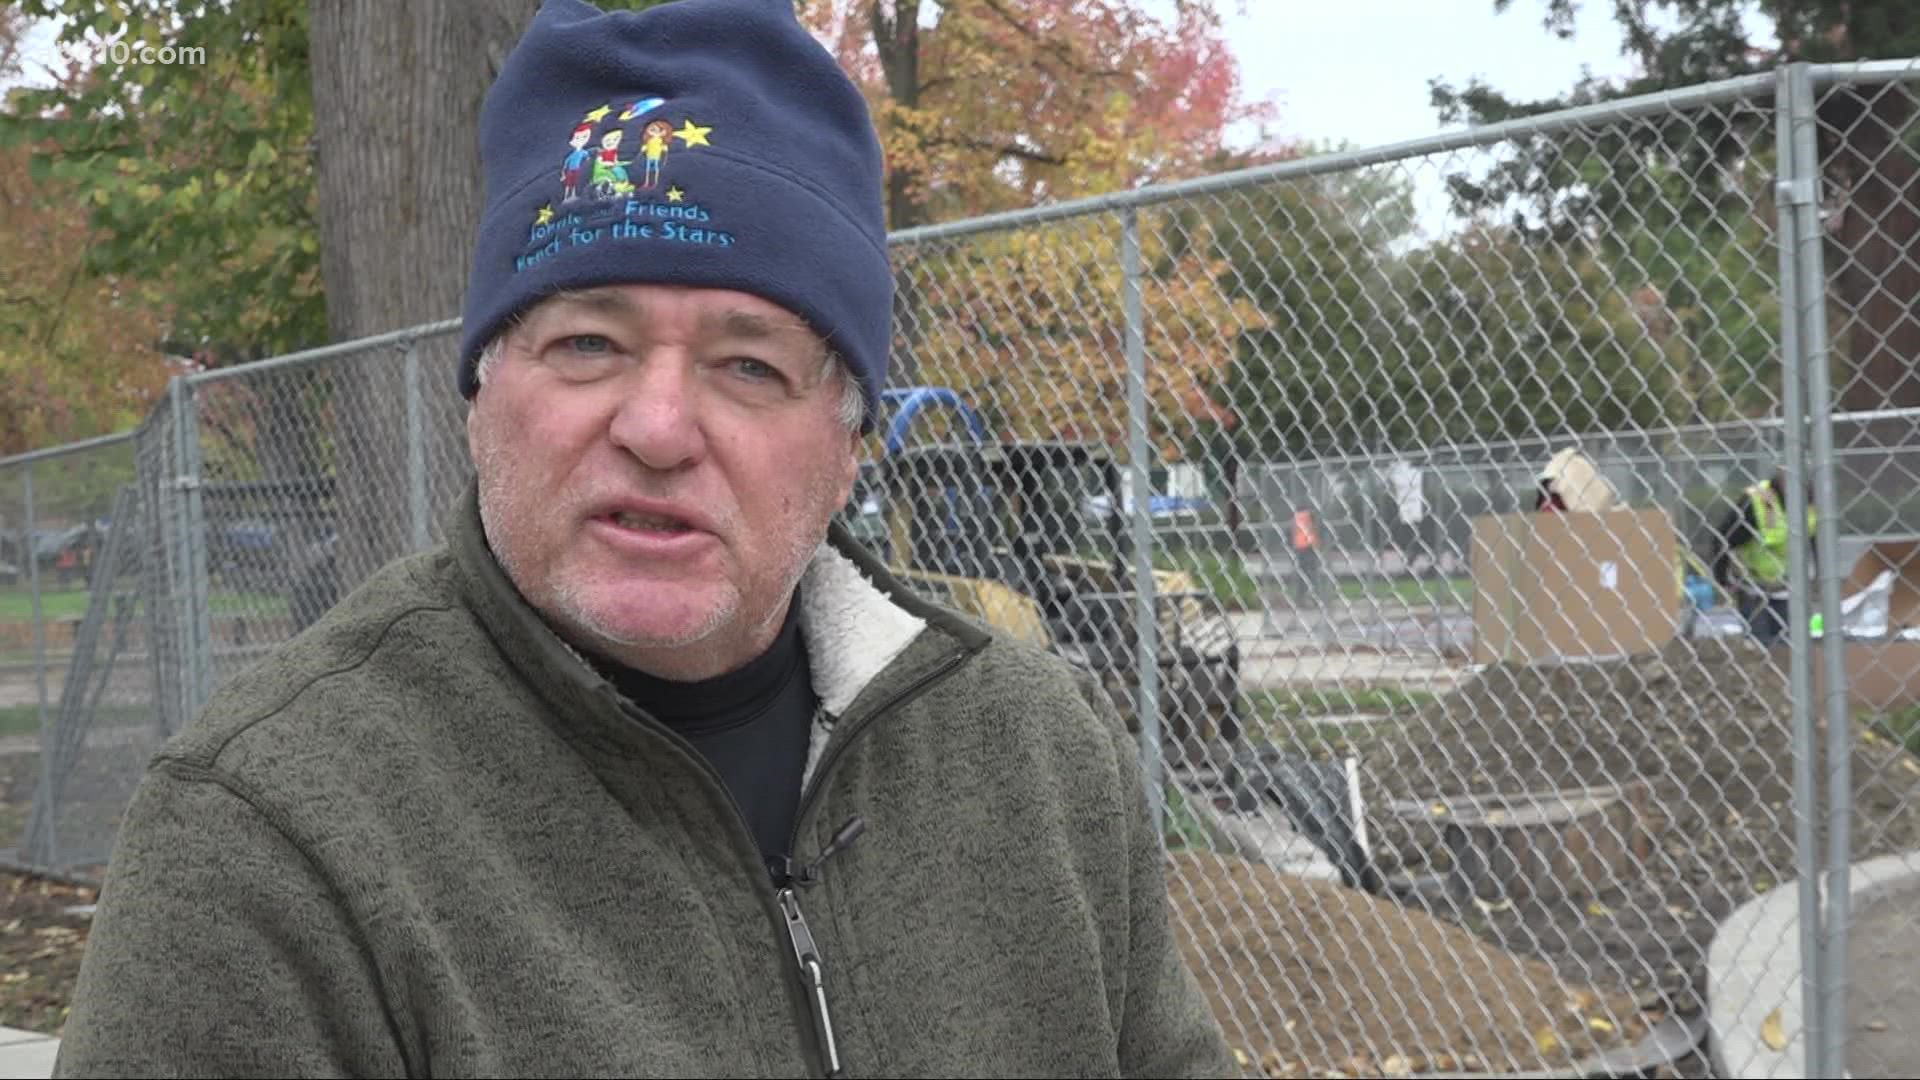 Lena Howland spoke to Marc Lever, the father behind the revitalization of Southside Park, about why making the park more inclusive is important to him.